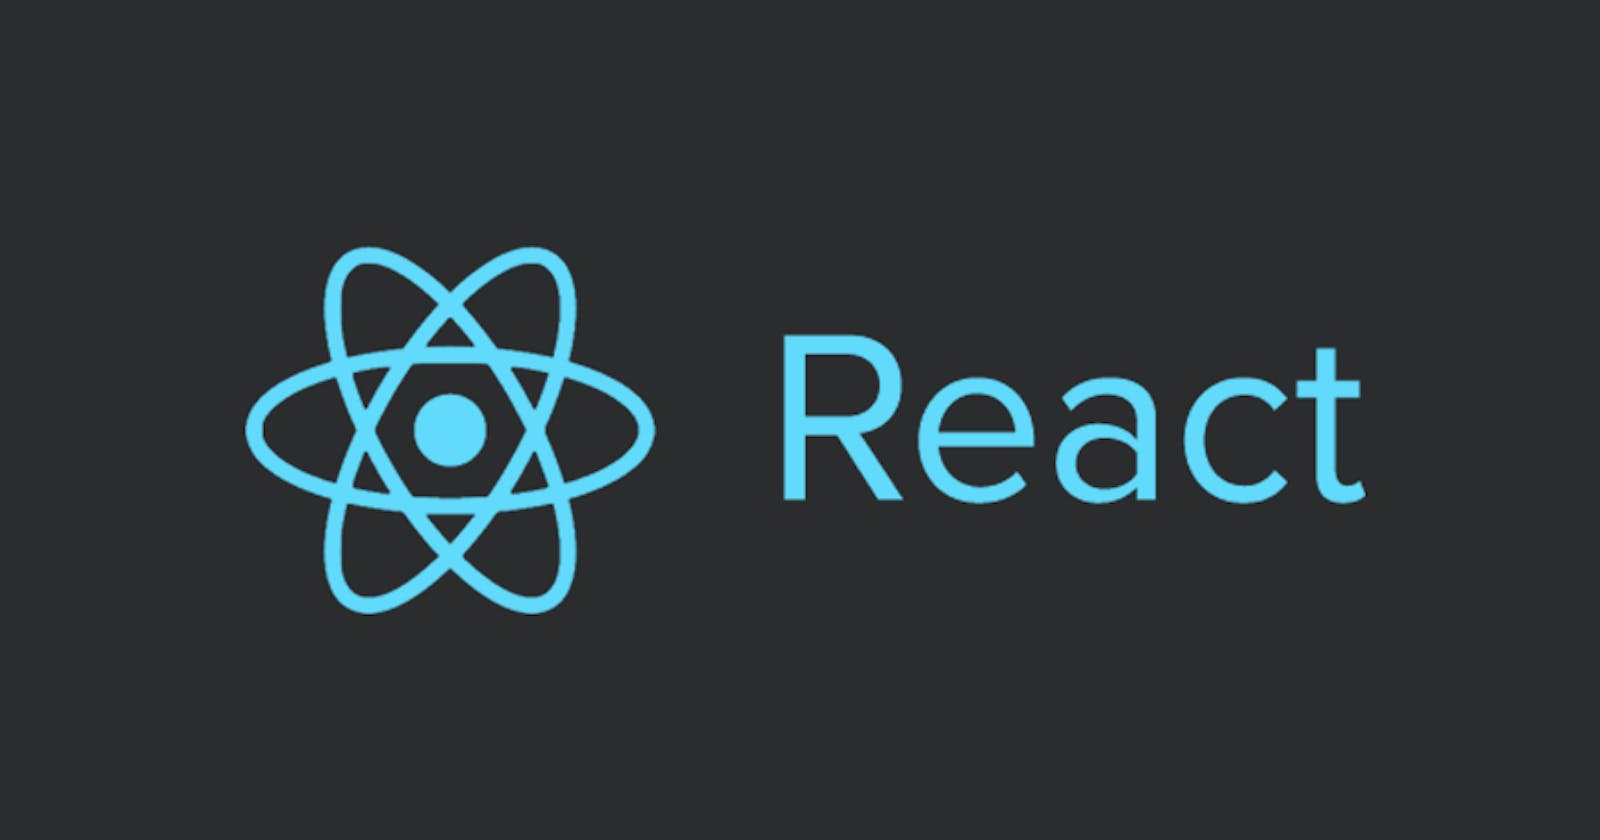 If I were to learn react again with my current level of knowledge.